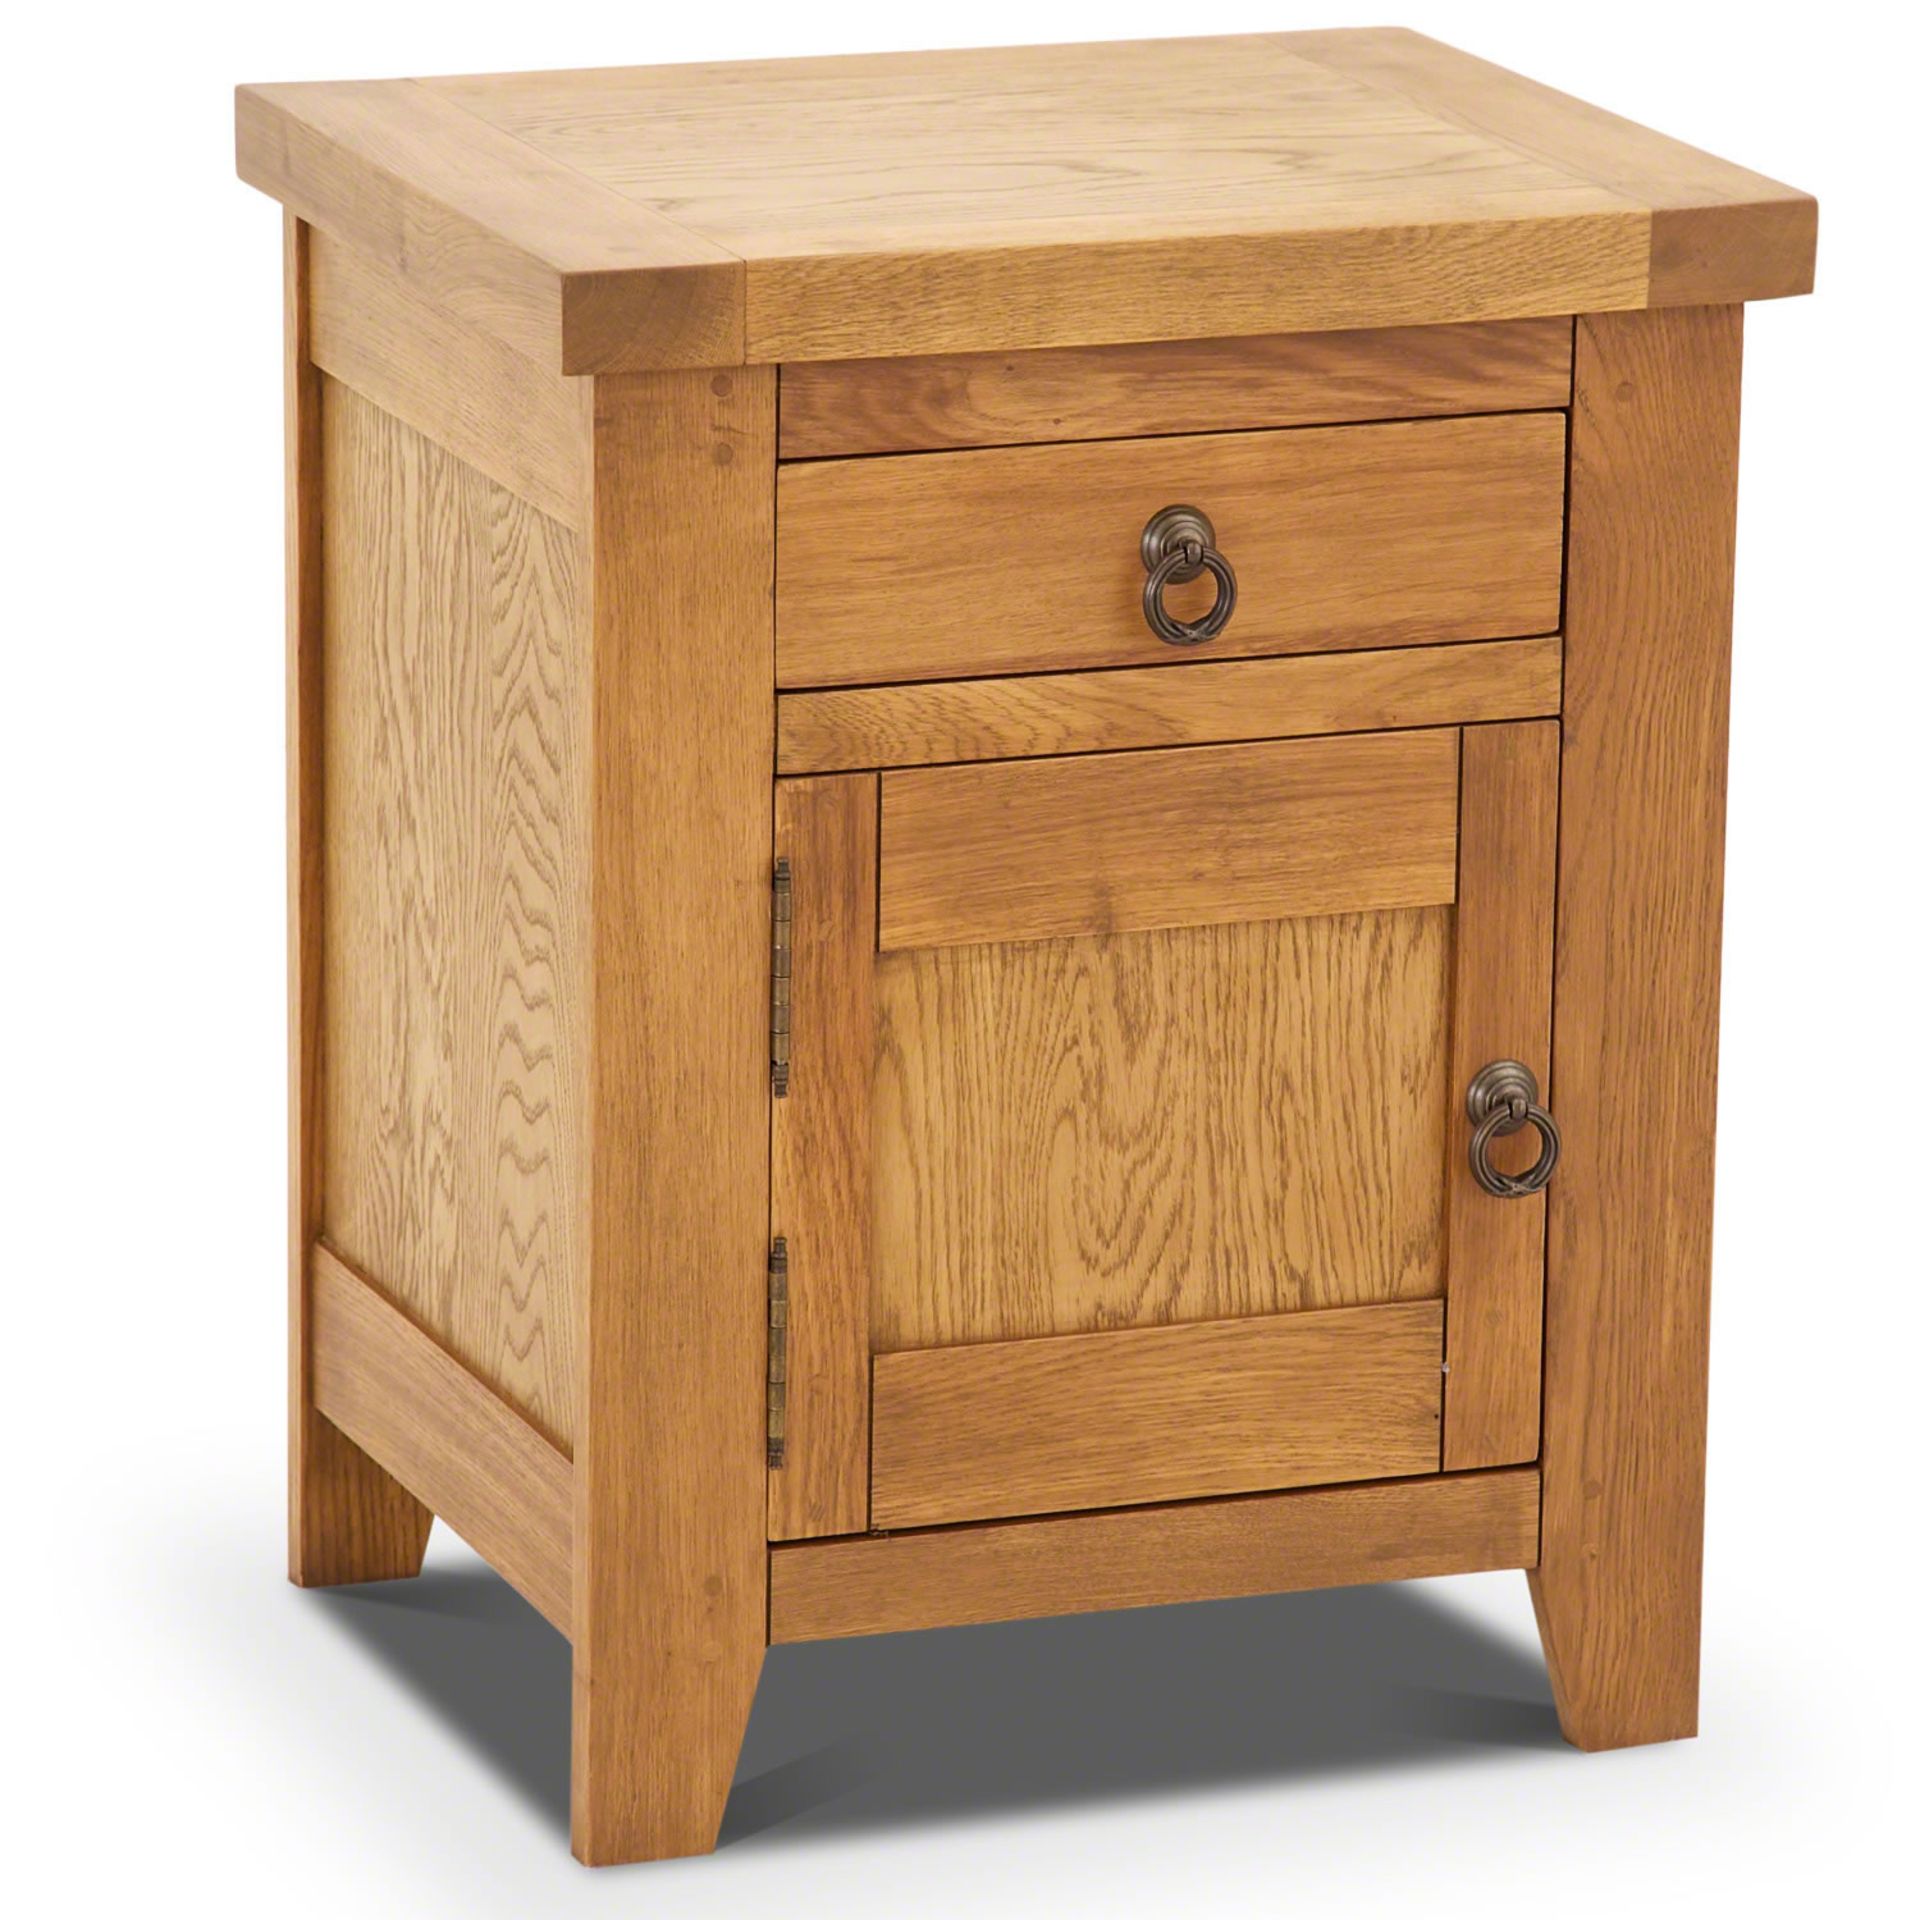 Sturdy oak bedside cabinet, perfect for those who like a classic feel to their bedroom. - Image 2 of 2